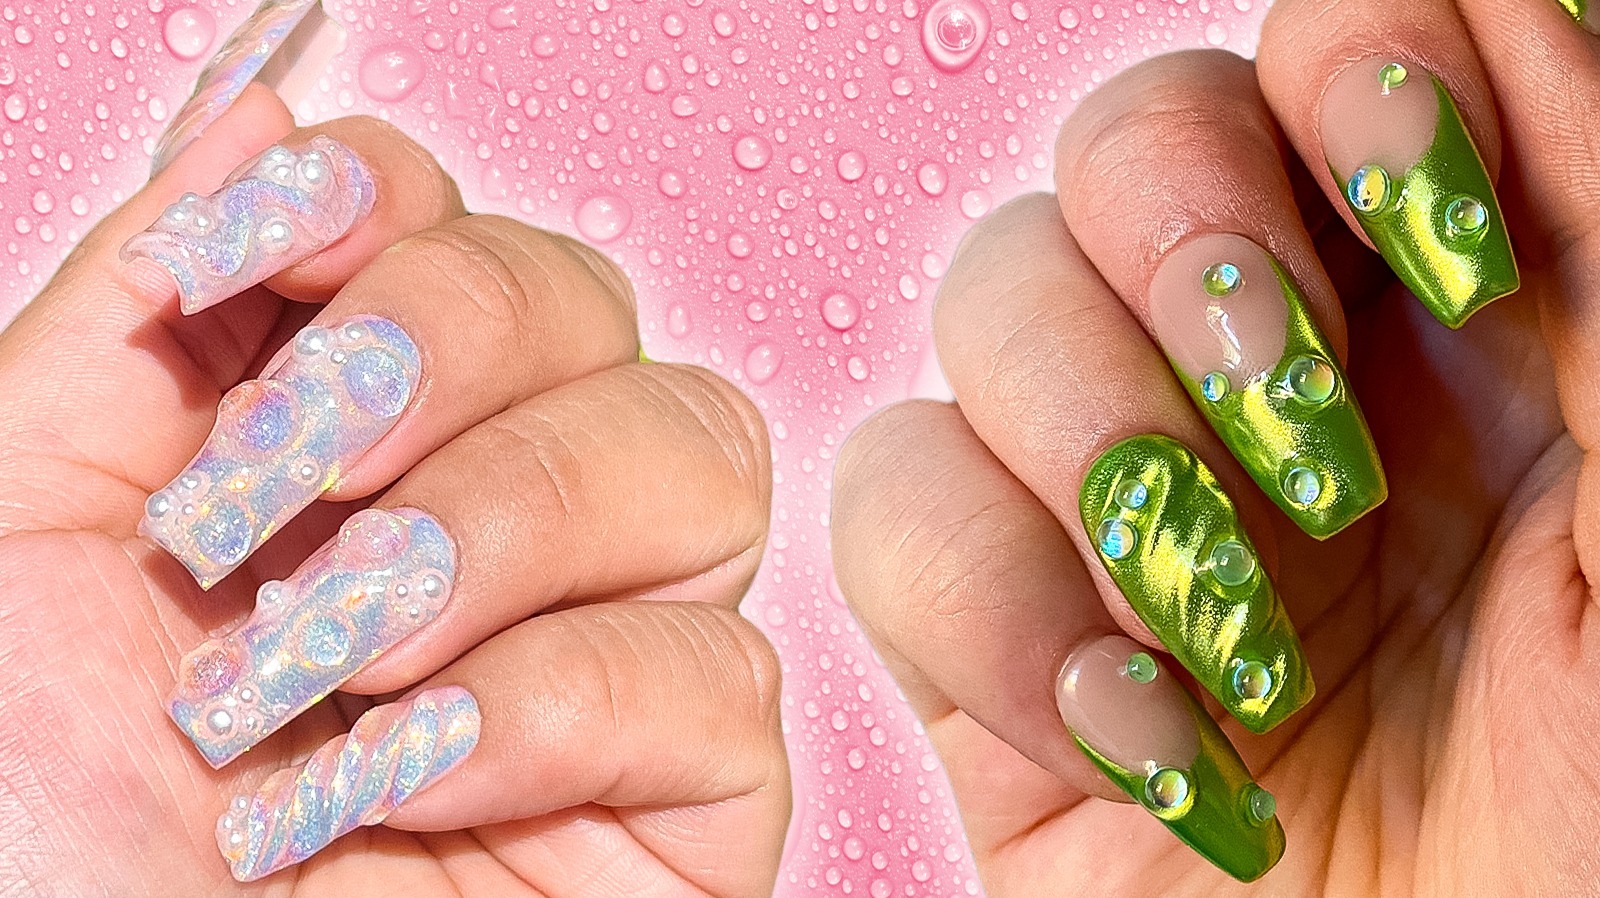 https://www.glam.com/img/gallery/water-droplet-nail-art-the-mani-capitalizing-on-the-wet-look-trend/l-intro-1689790996.jpg